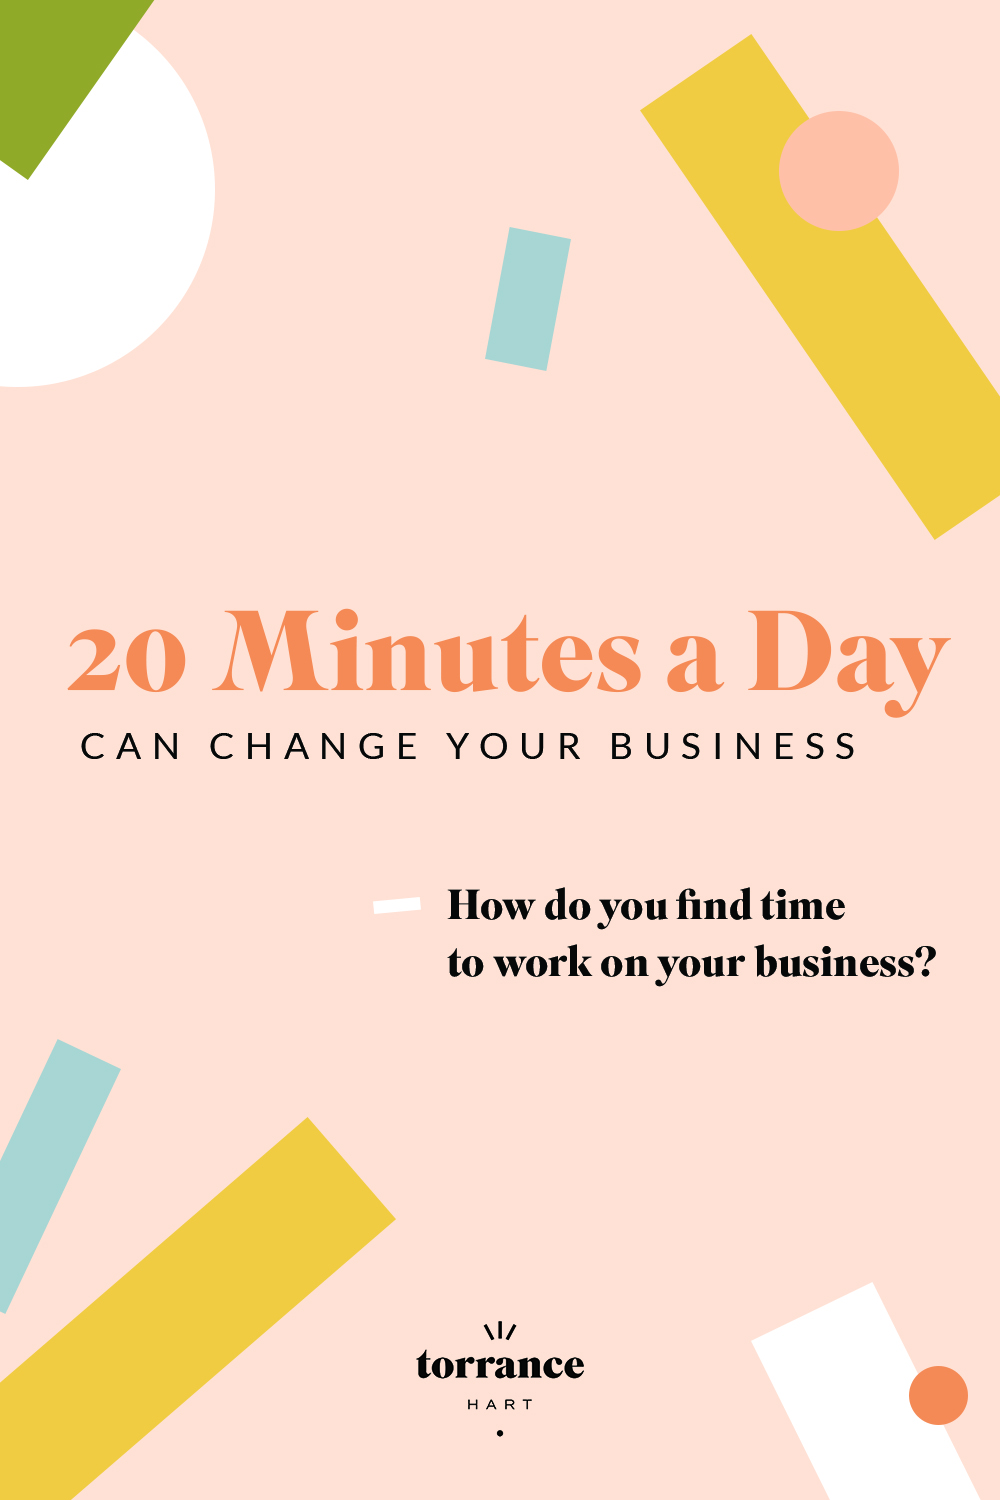 How 20 Minutes a Day Can Change Your Business